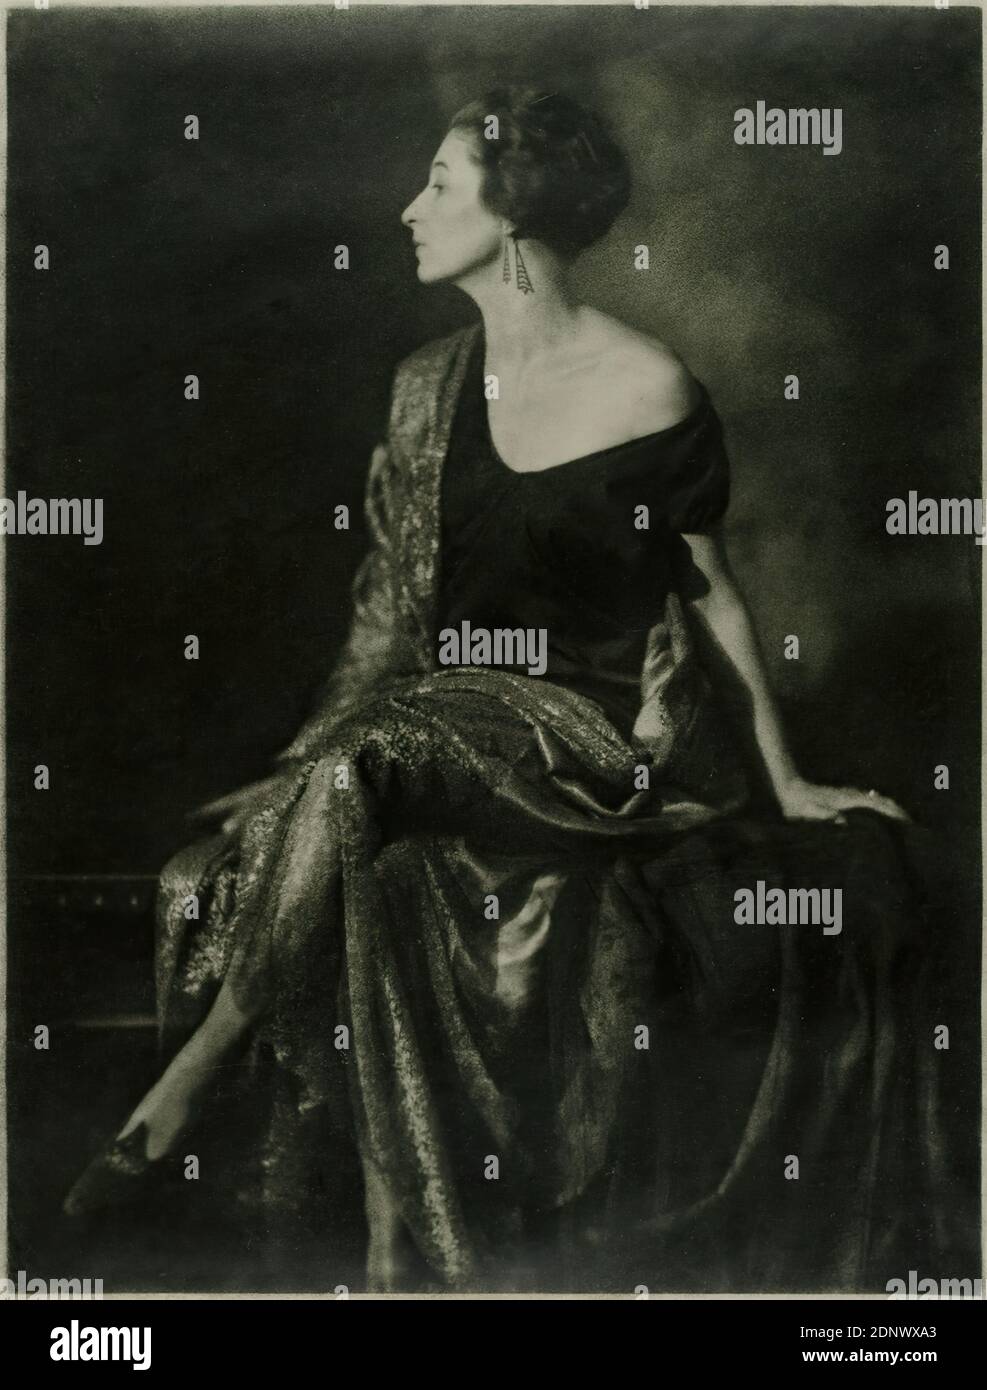 Franz Grainer, portrait of a woman, Staatliche Landesbildstelle Hamburg, collection on the history of photography, paper, bromoil print, image size: height: 44,5 cm; width: 34,5 cm, signed: recto u. re. in lead: Grainer, stamp: verso and left: stamp and object inscription of the Staatliche Landesbildstelle Hamburg, portrait photography, full-length portrait, profile (side view), sitting figure, fashion, clothing, woman, portrait Stock Photo